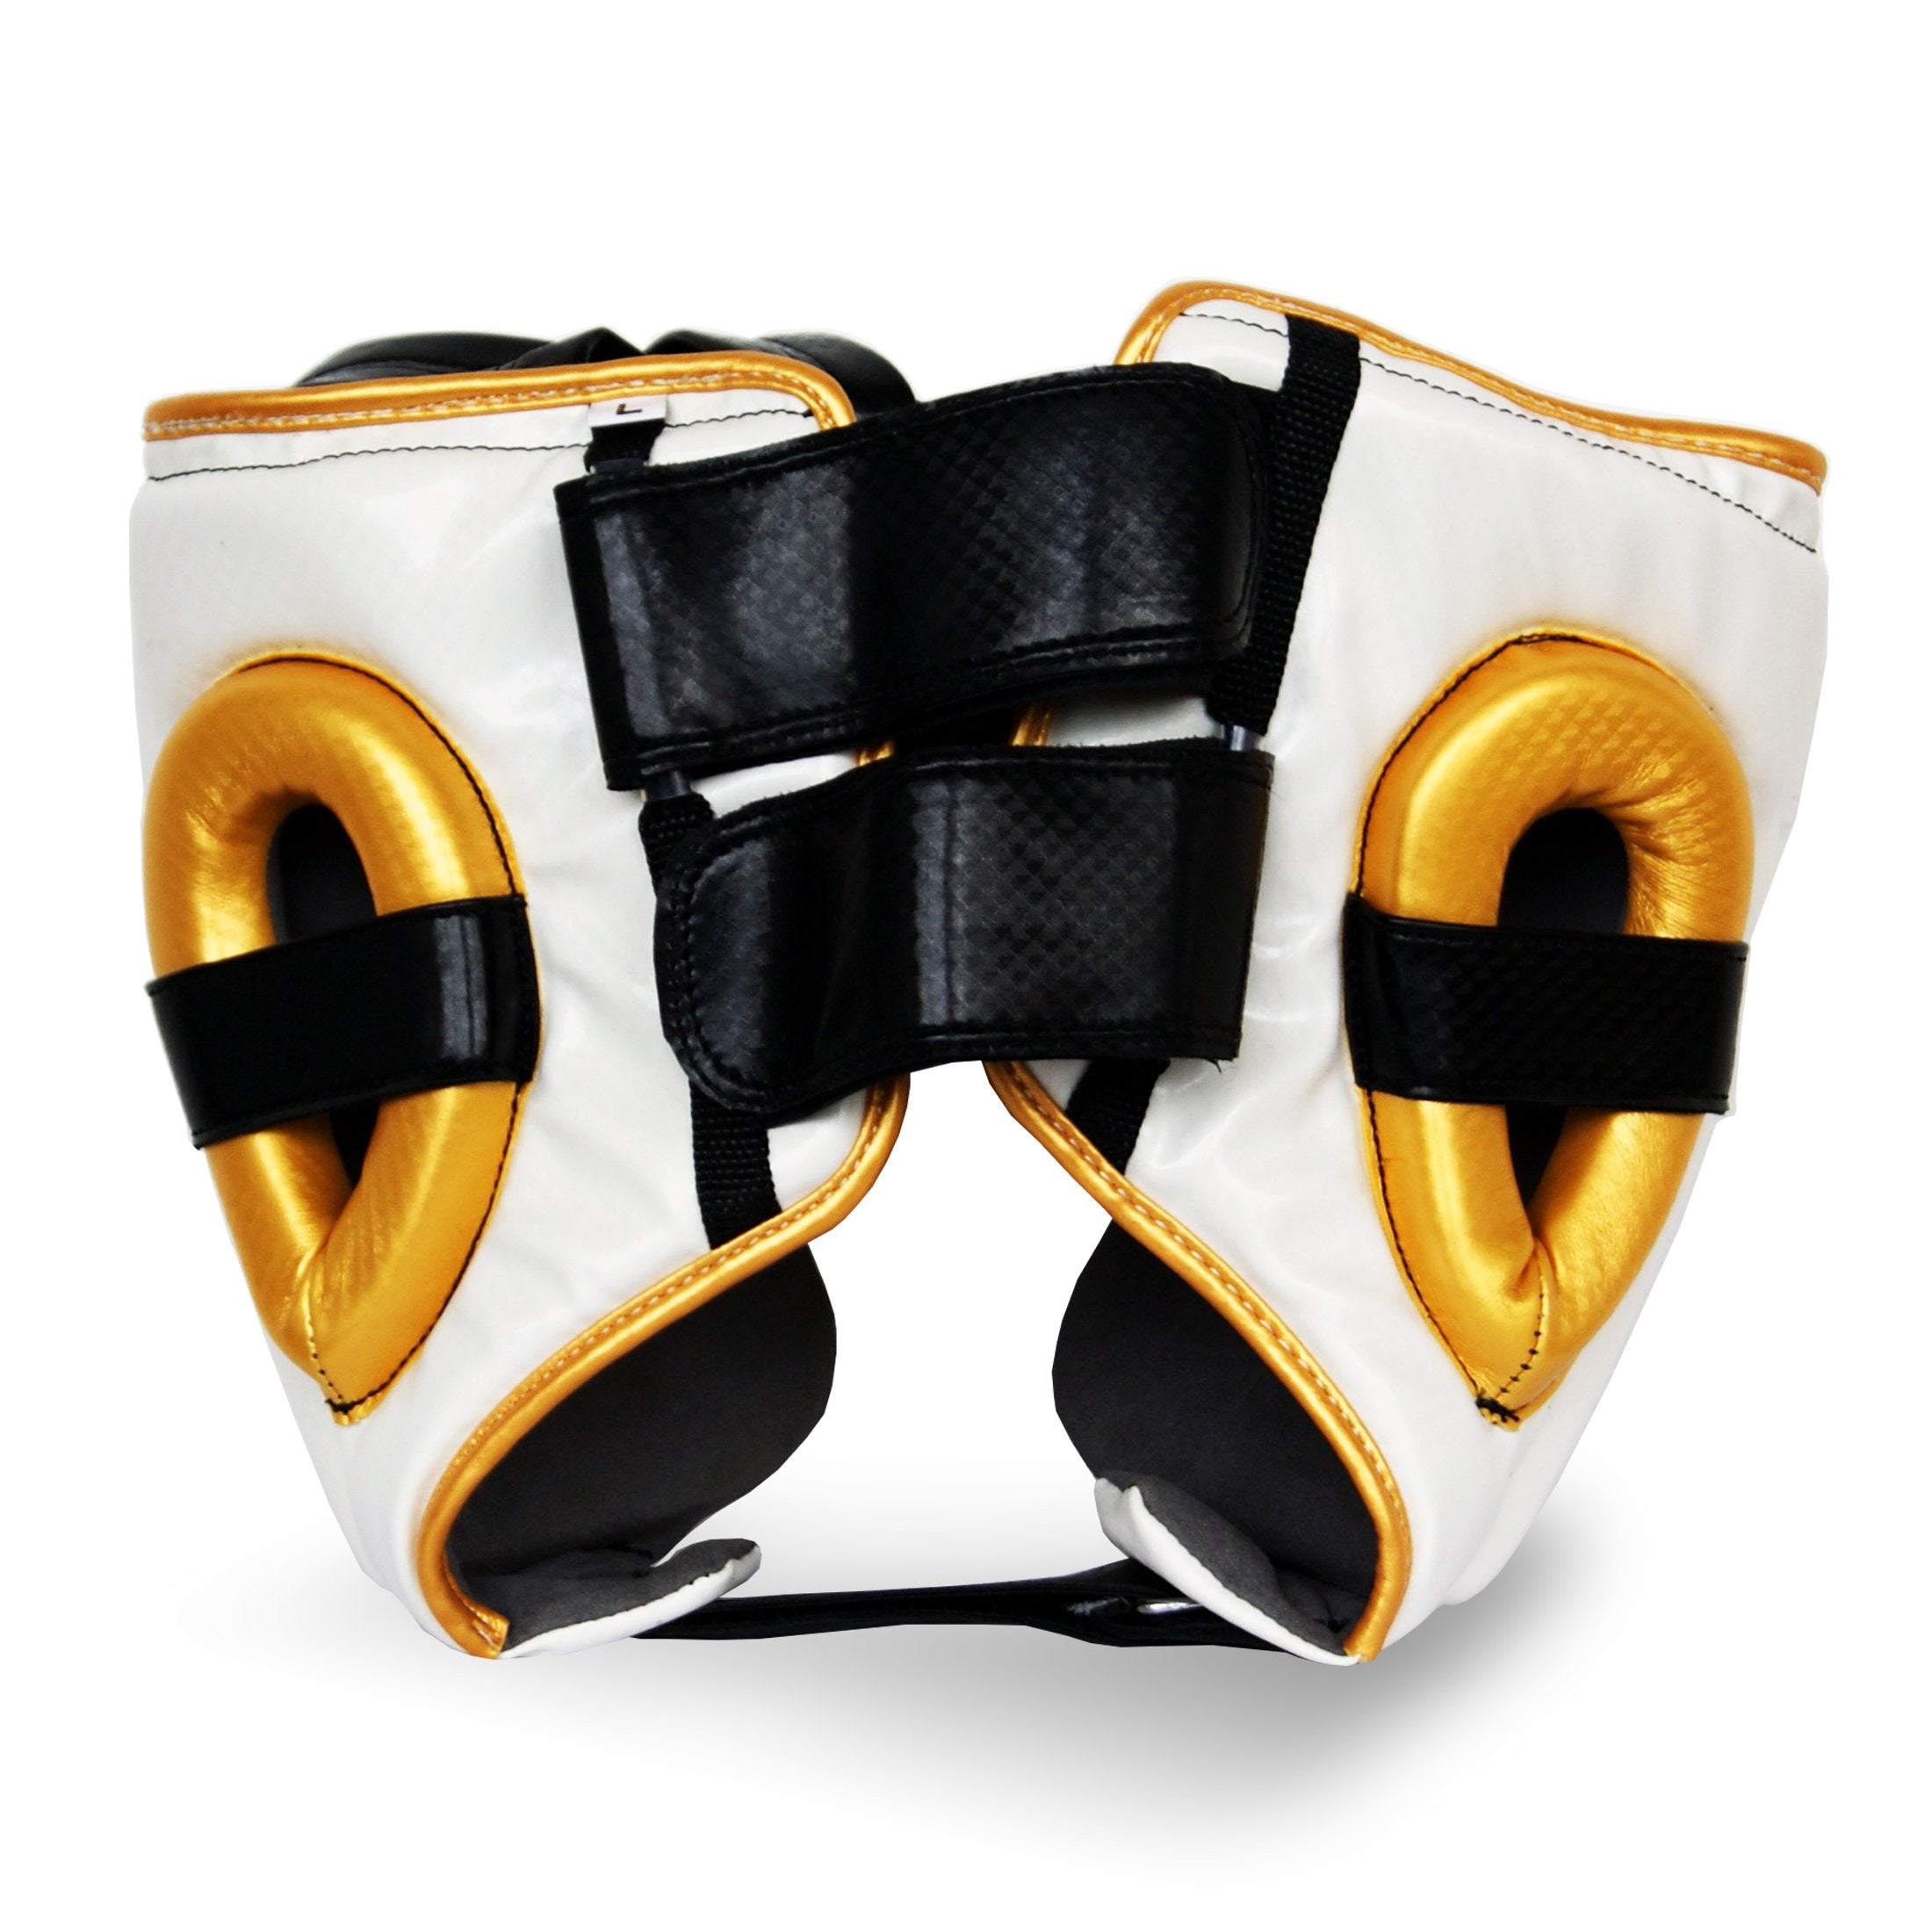 Pro Fitness Head Guard Synthetic Leather Metallic White / Black / Gold